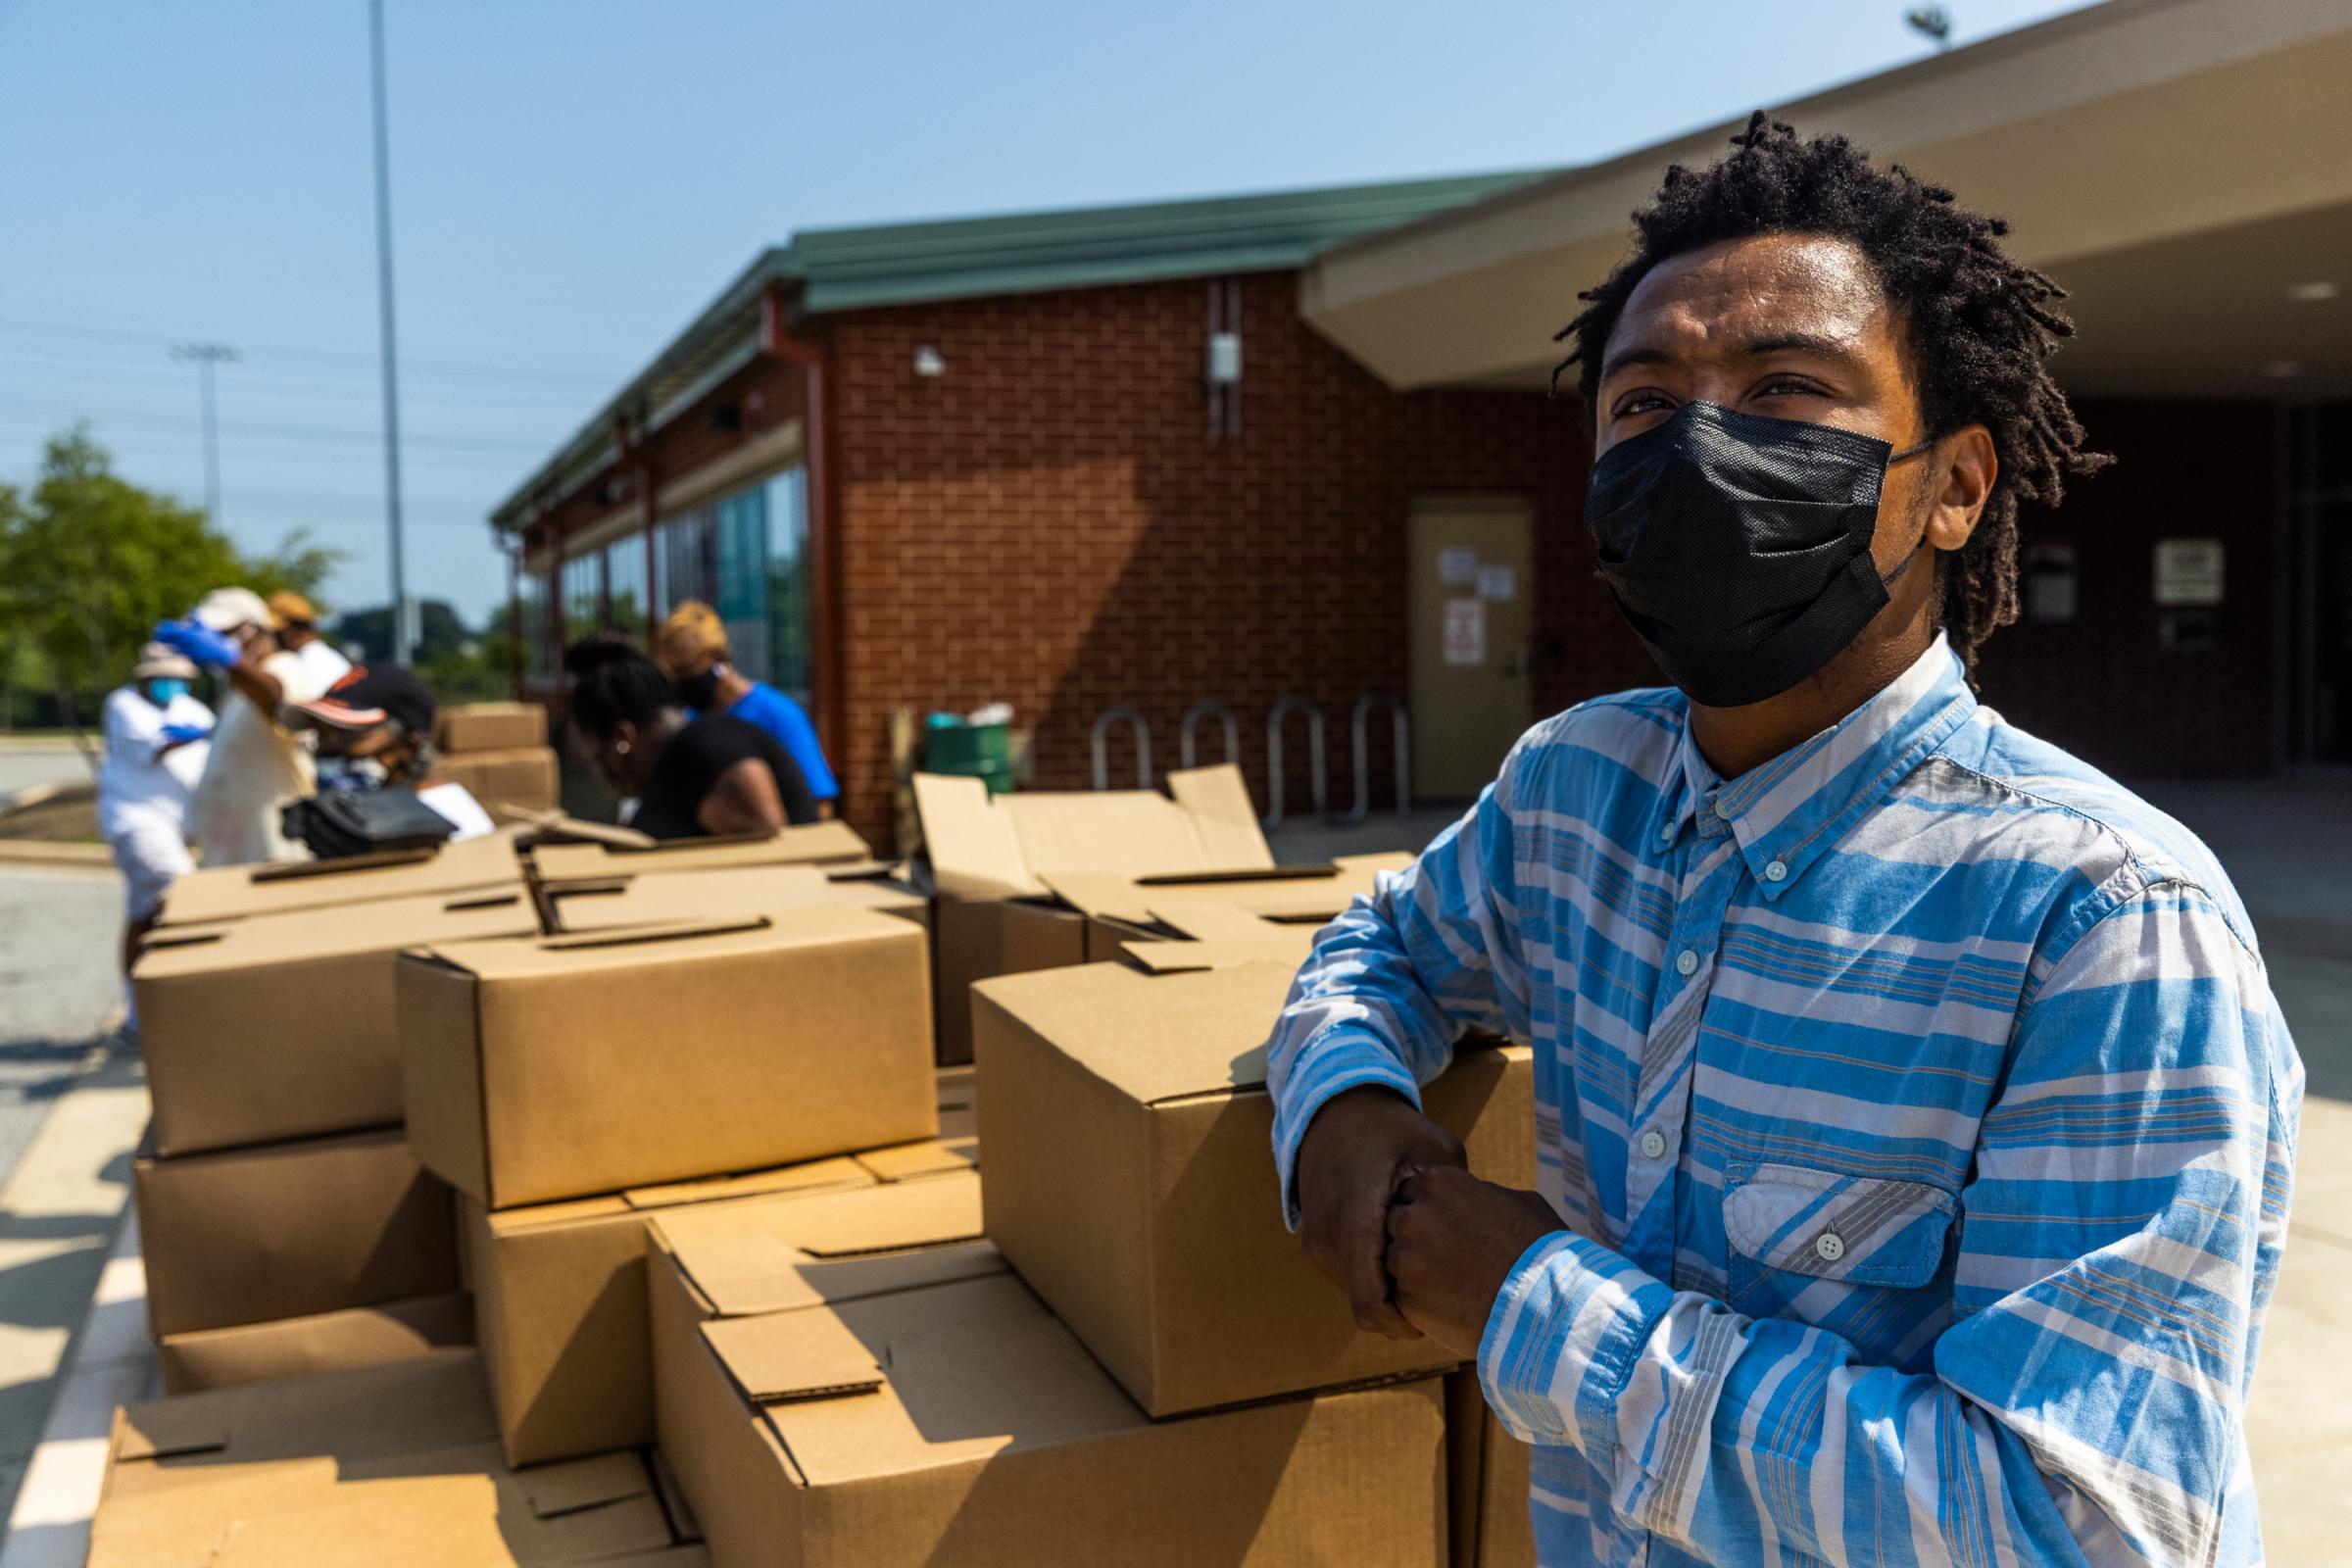 Turner Station: Heart and Soul - Devonte Wilkins stands next to boxes of food during...